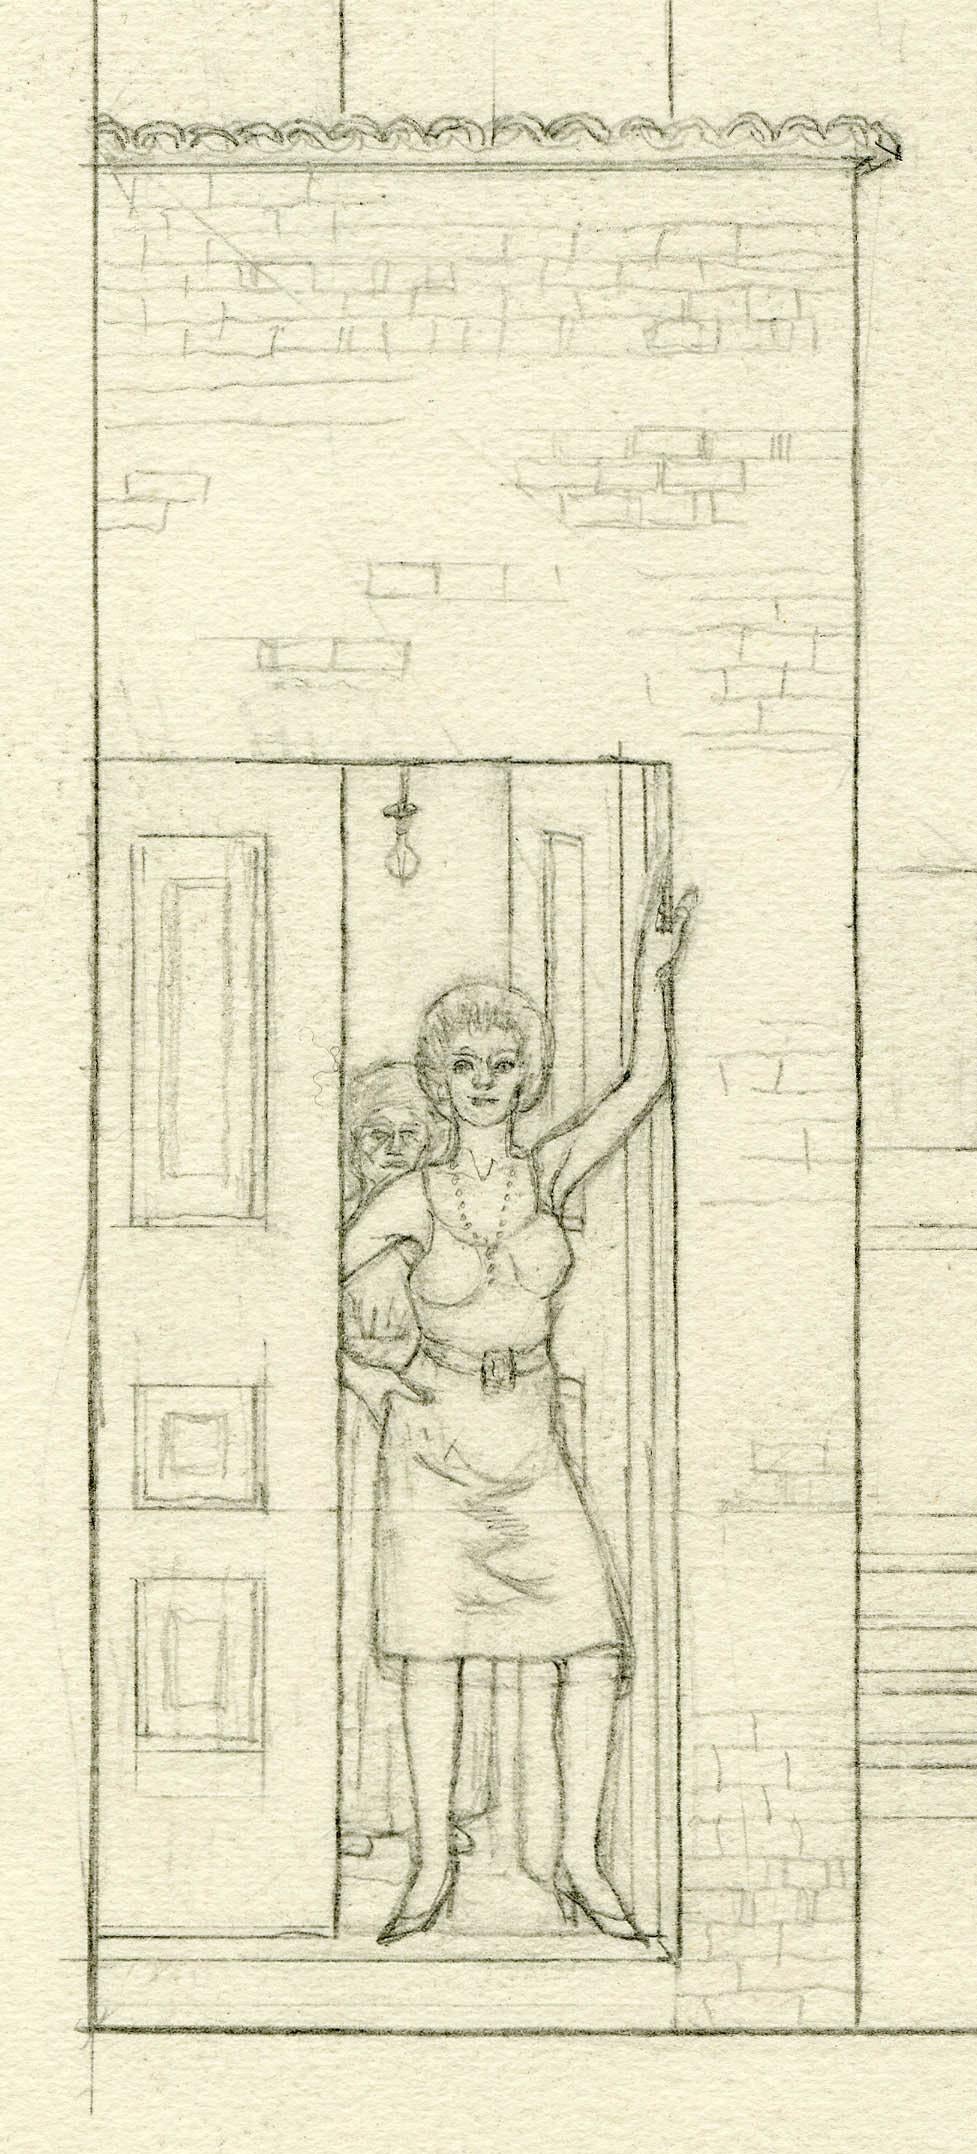 Study of an Italian Town with Women in a Doorway - Art by Jared French